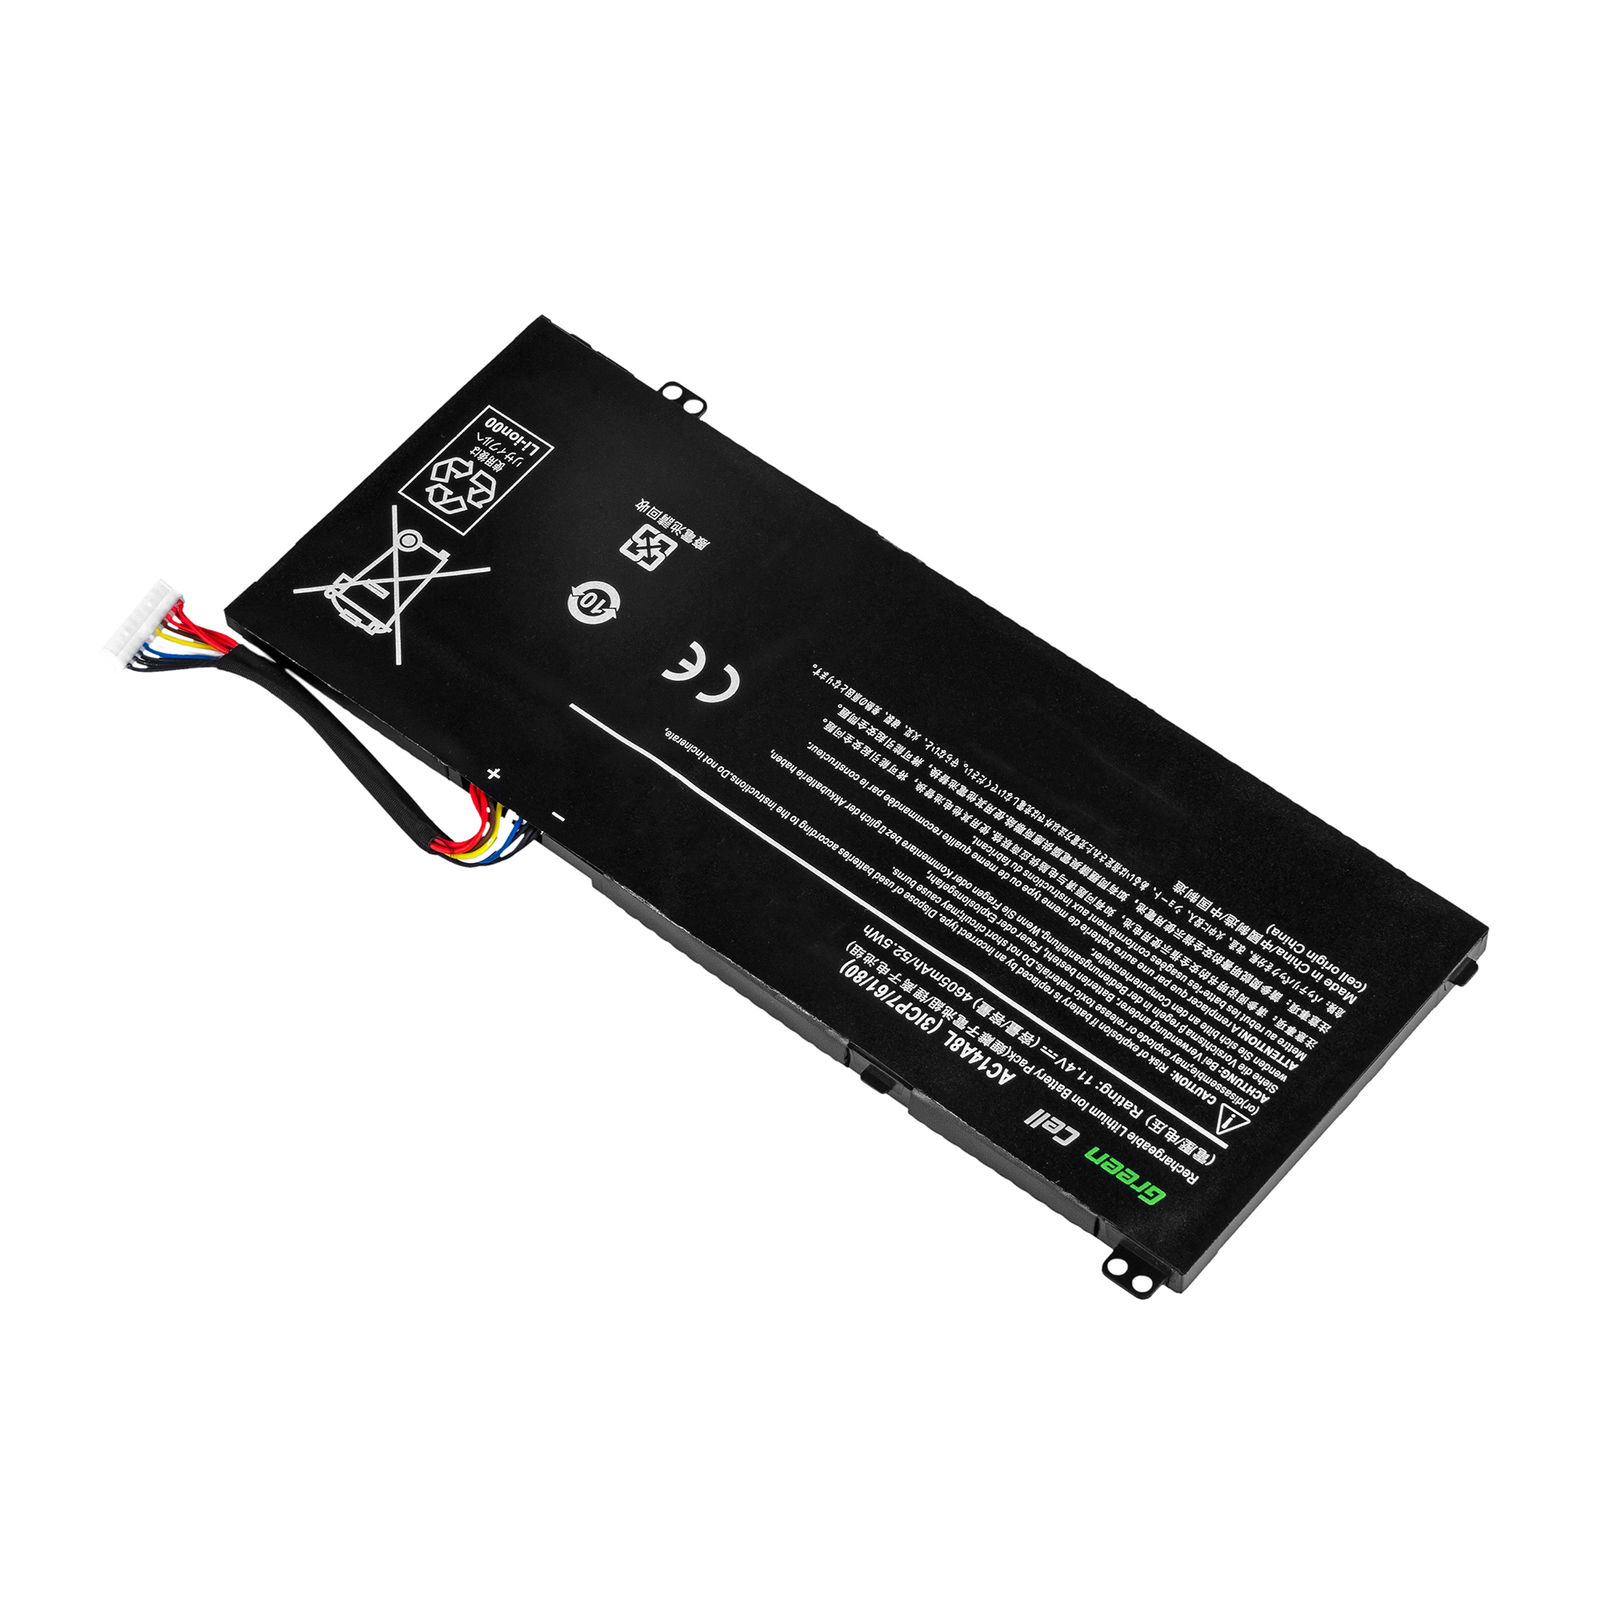 Accu voor AC14A8L ACER Aspire VN7-571,VN7-571G,VN7-591,VN7-591G,VN7-791,VN7-791G(compatible)